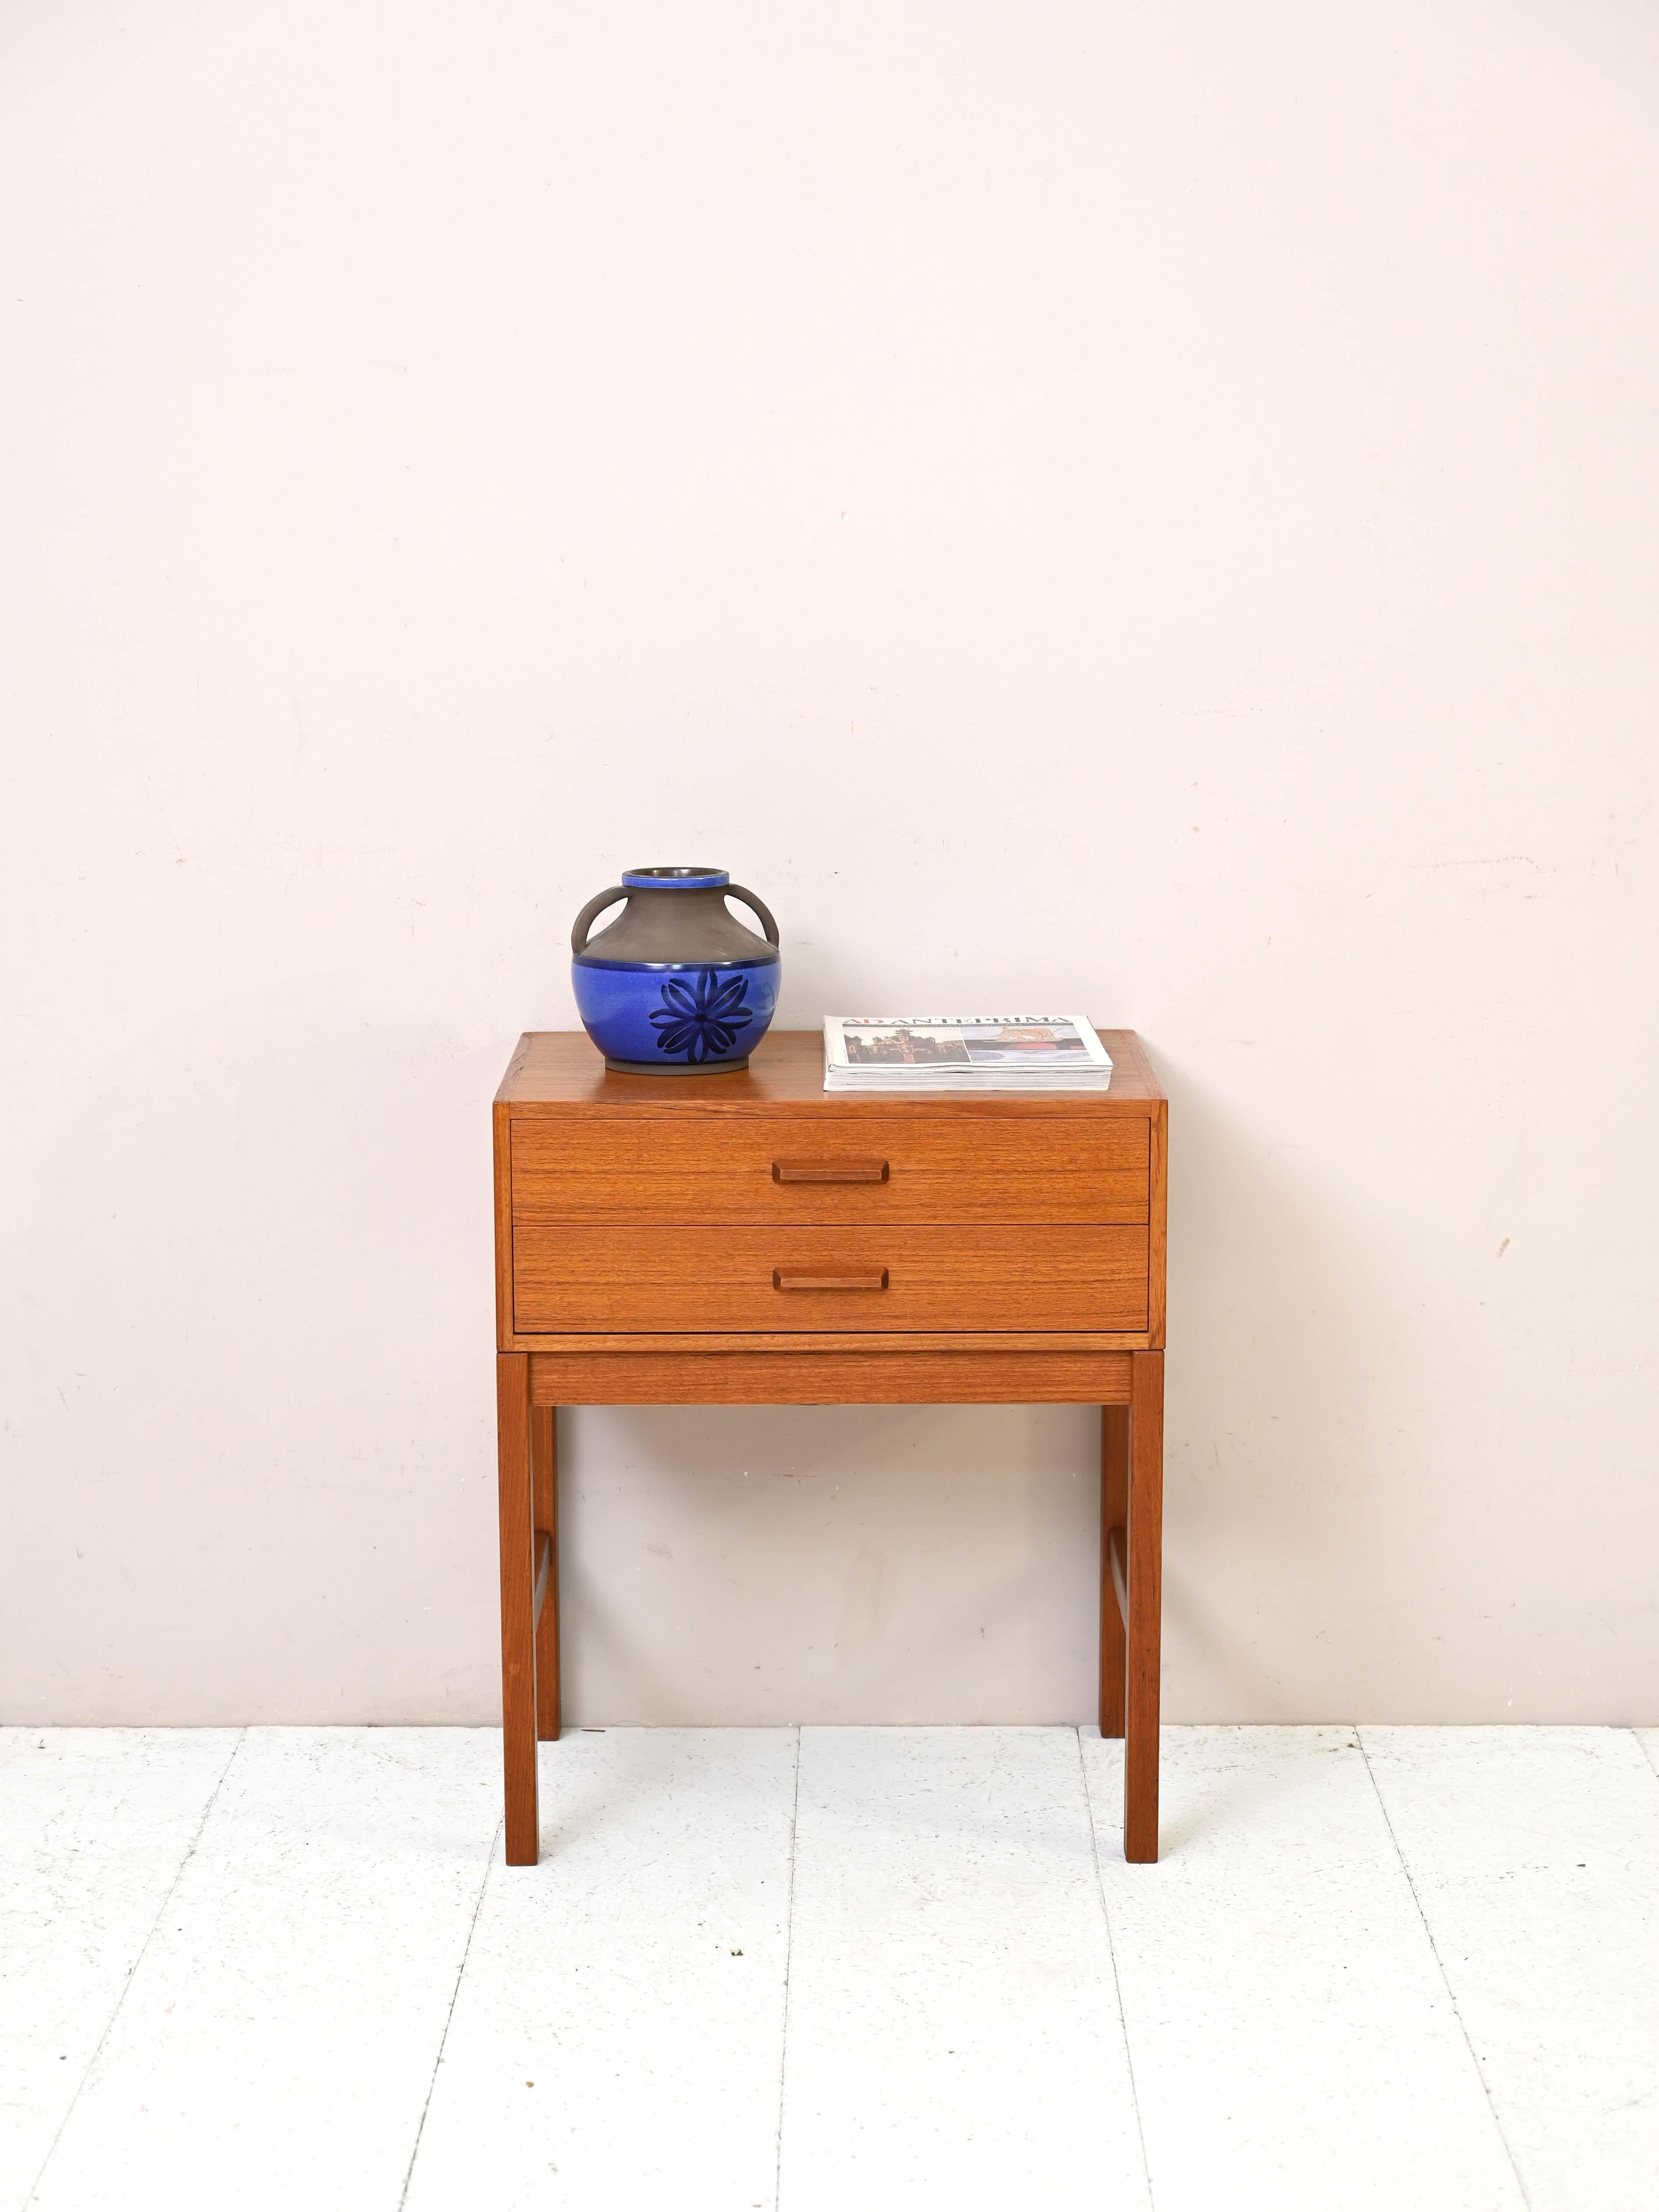 1960s teak bedside table.

This vintage piece of furniture features simple, square shapes and an all teak frame. The handle of the two drawers is also carved wood.
Ideal as a nightstand but also as an entryway cabinet.

Good condition, conservative